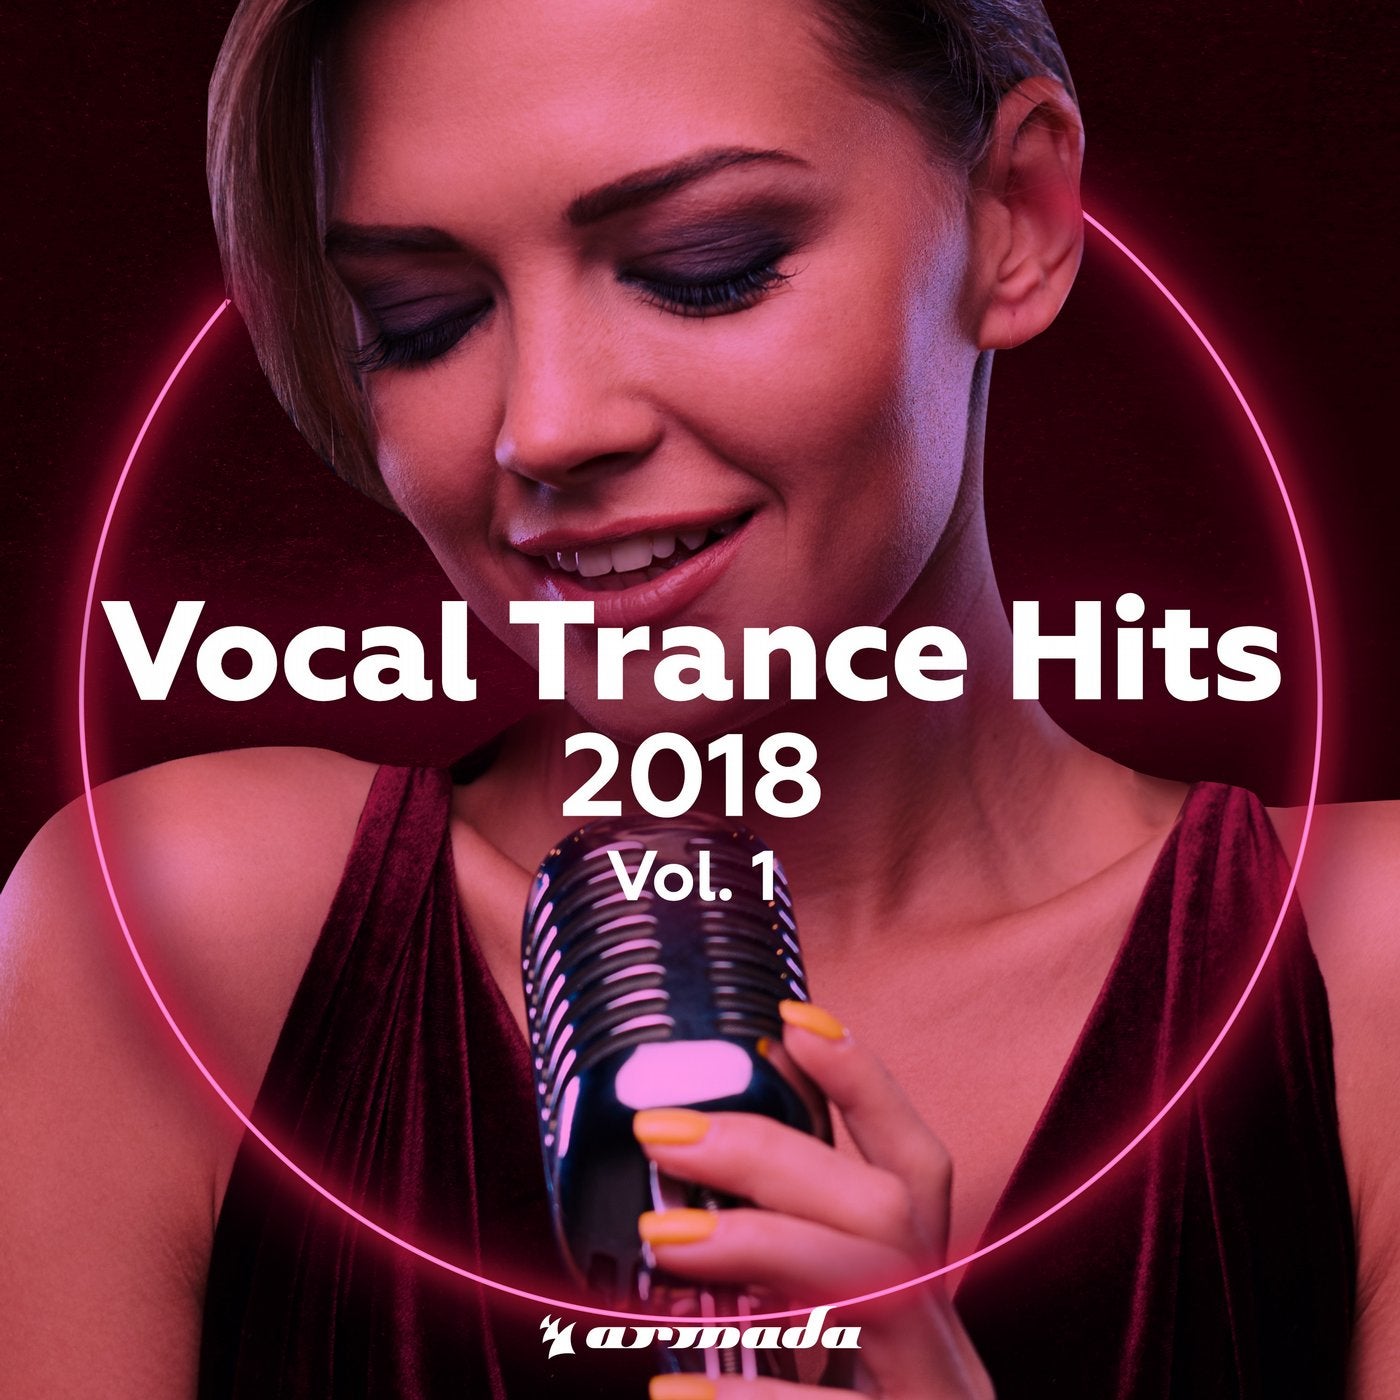 Vocal Trance Hits 2018 - Vol. 1 - Extended Versions